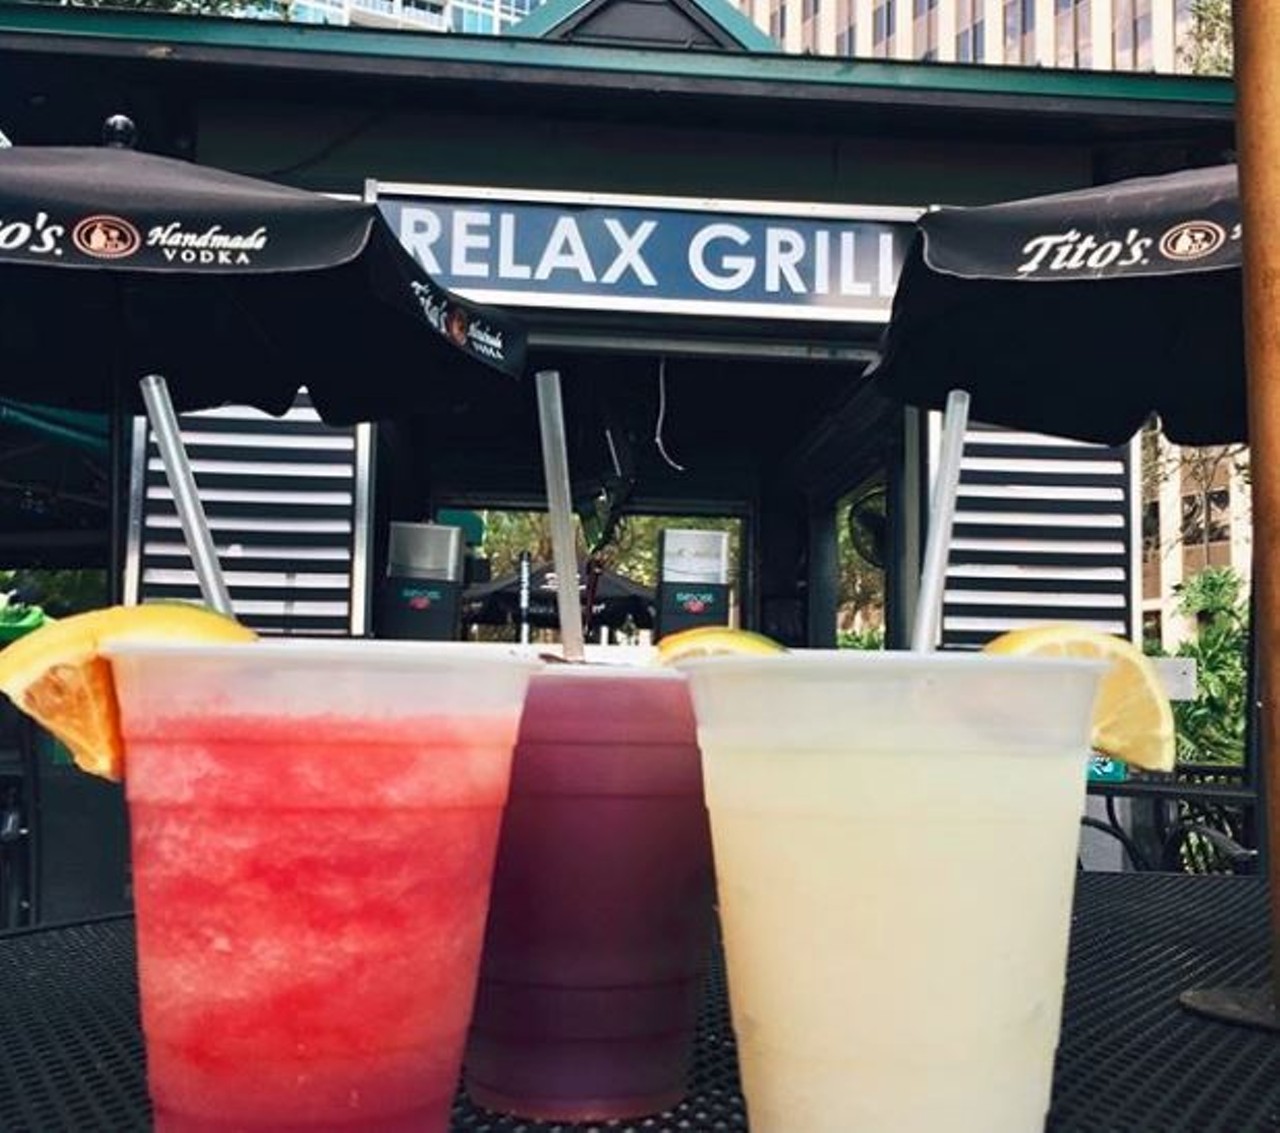 Relax Grill
211 Eola Pkwy, 407-425-8440
Take a minute to relax during happy hour at this outdoor patio and bar on Lake Eola. Monday through Thursday, you can get $2 off entrees and premium drinks, (we suggest the fried pickles) along with $2 beer and $4 wine between 4 to 7 p.m. Plus, don&#146;t miss Happy Fridays - all you can drink beer and wine for $15, 8pm - close. Not that you have to do that. Drink a relaxing amount, why don&#146;t you.
Photo via relaxgrill/Instagram